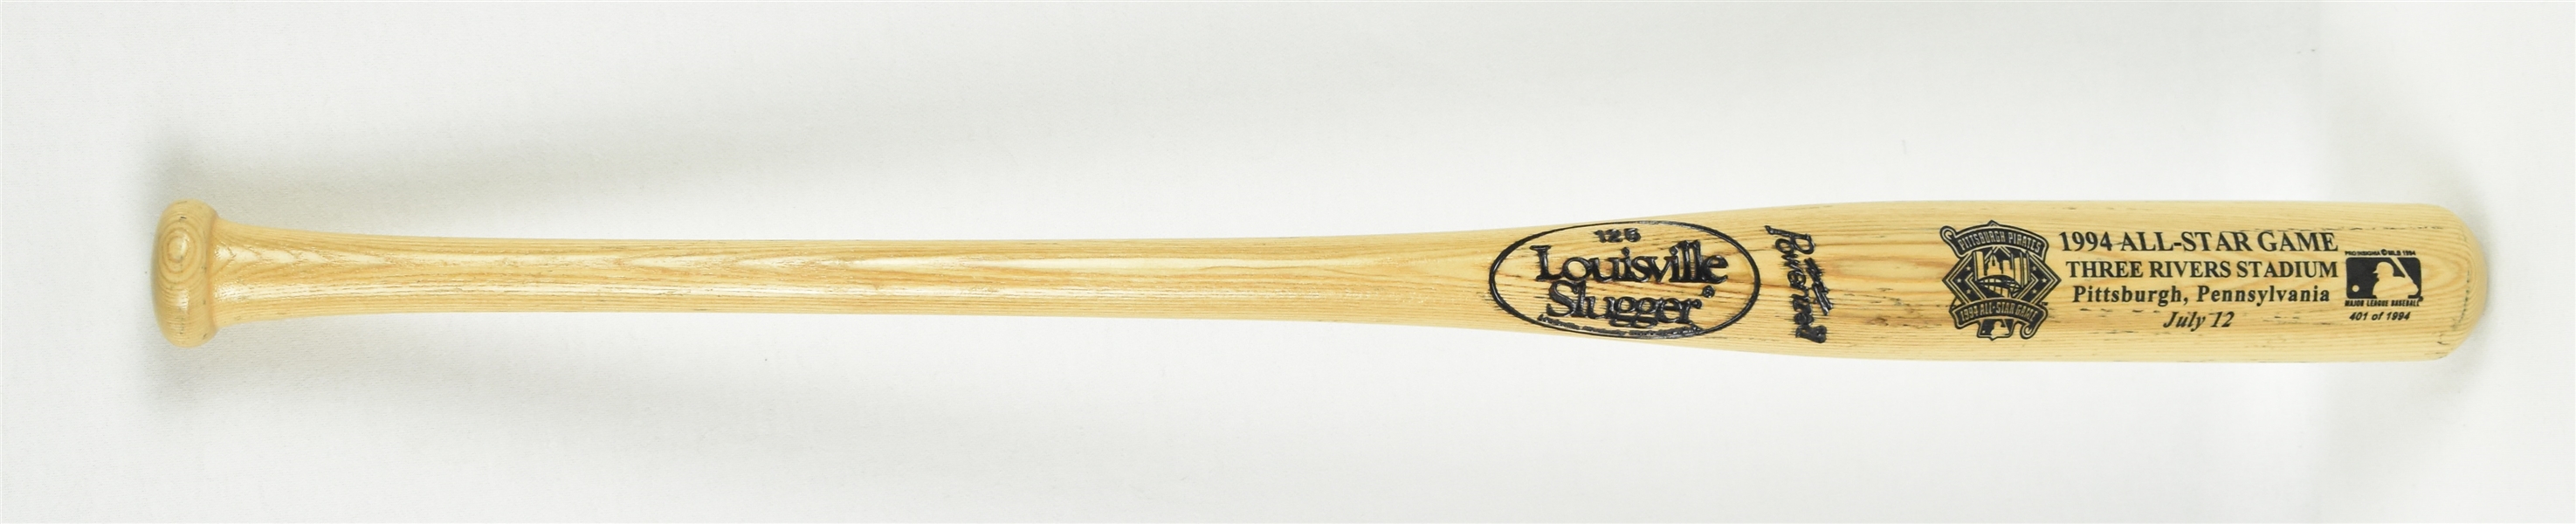 Kirby Puckett Owned 1994 All-Star Game Bat